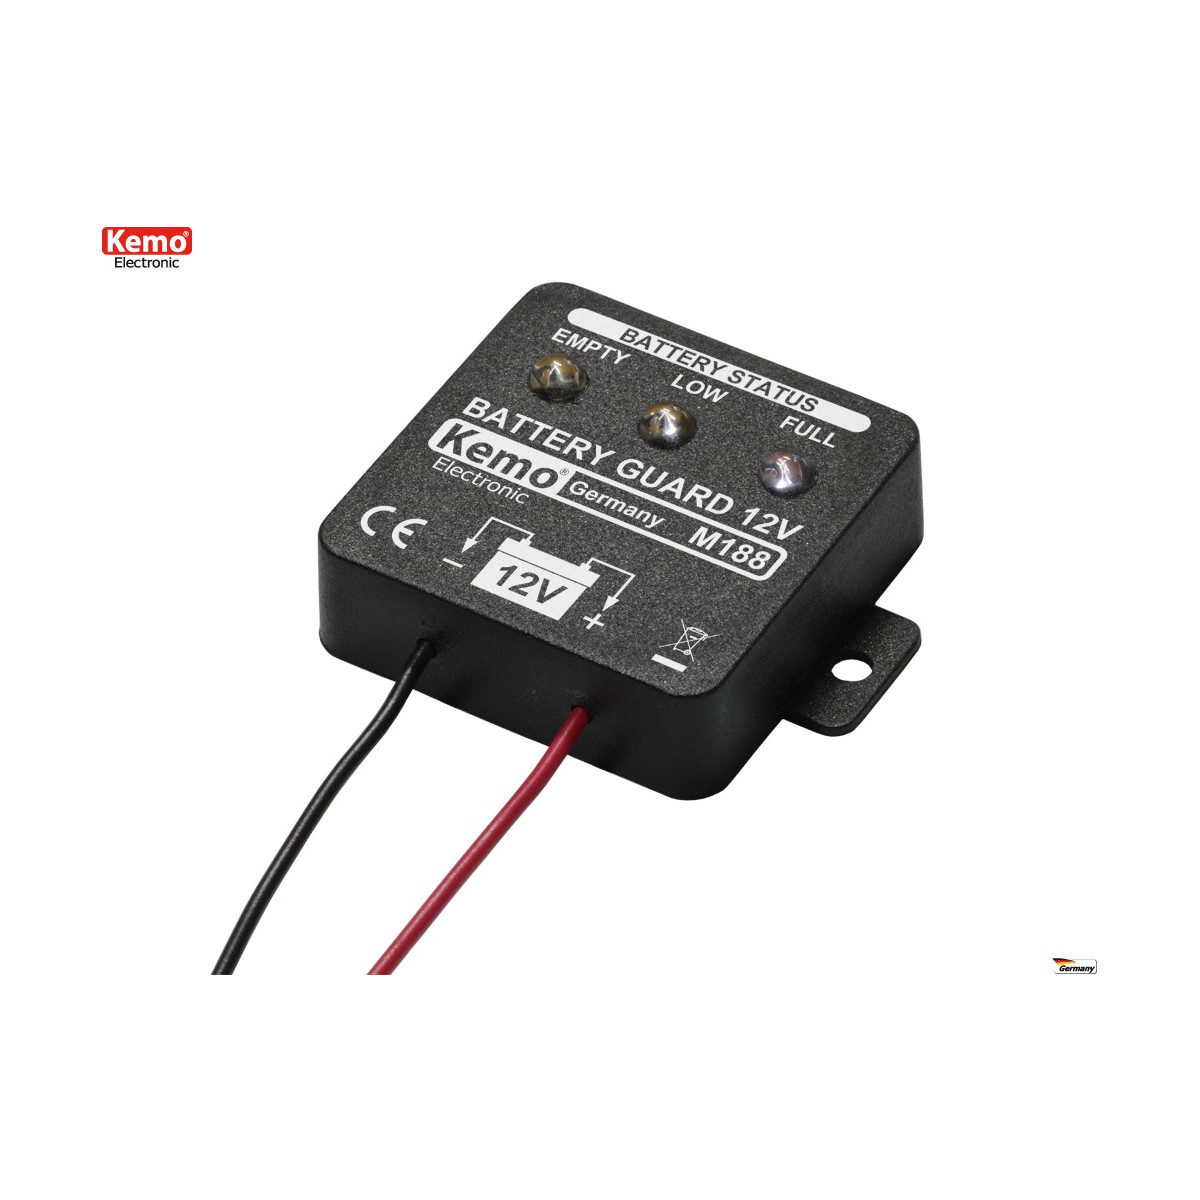 https://store.mectronica.it/711-large_ebay/indicatore-livello-carica-batterie-piombo-12v-universale-a-5-livelli-led.jpg